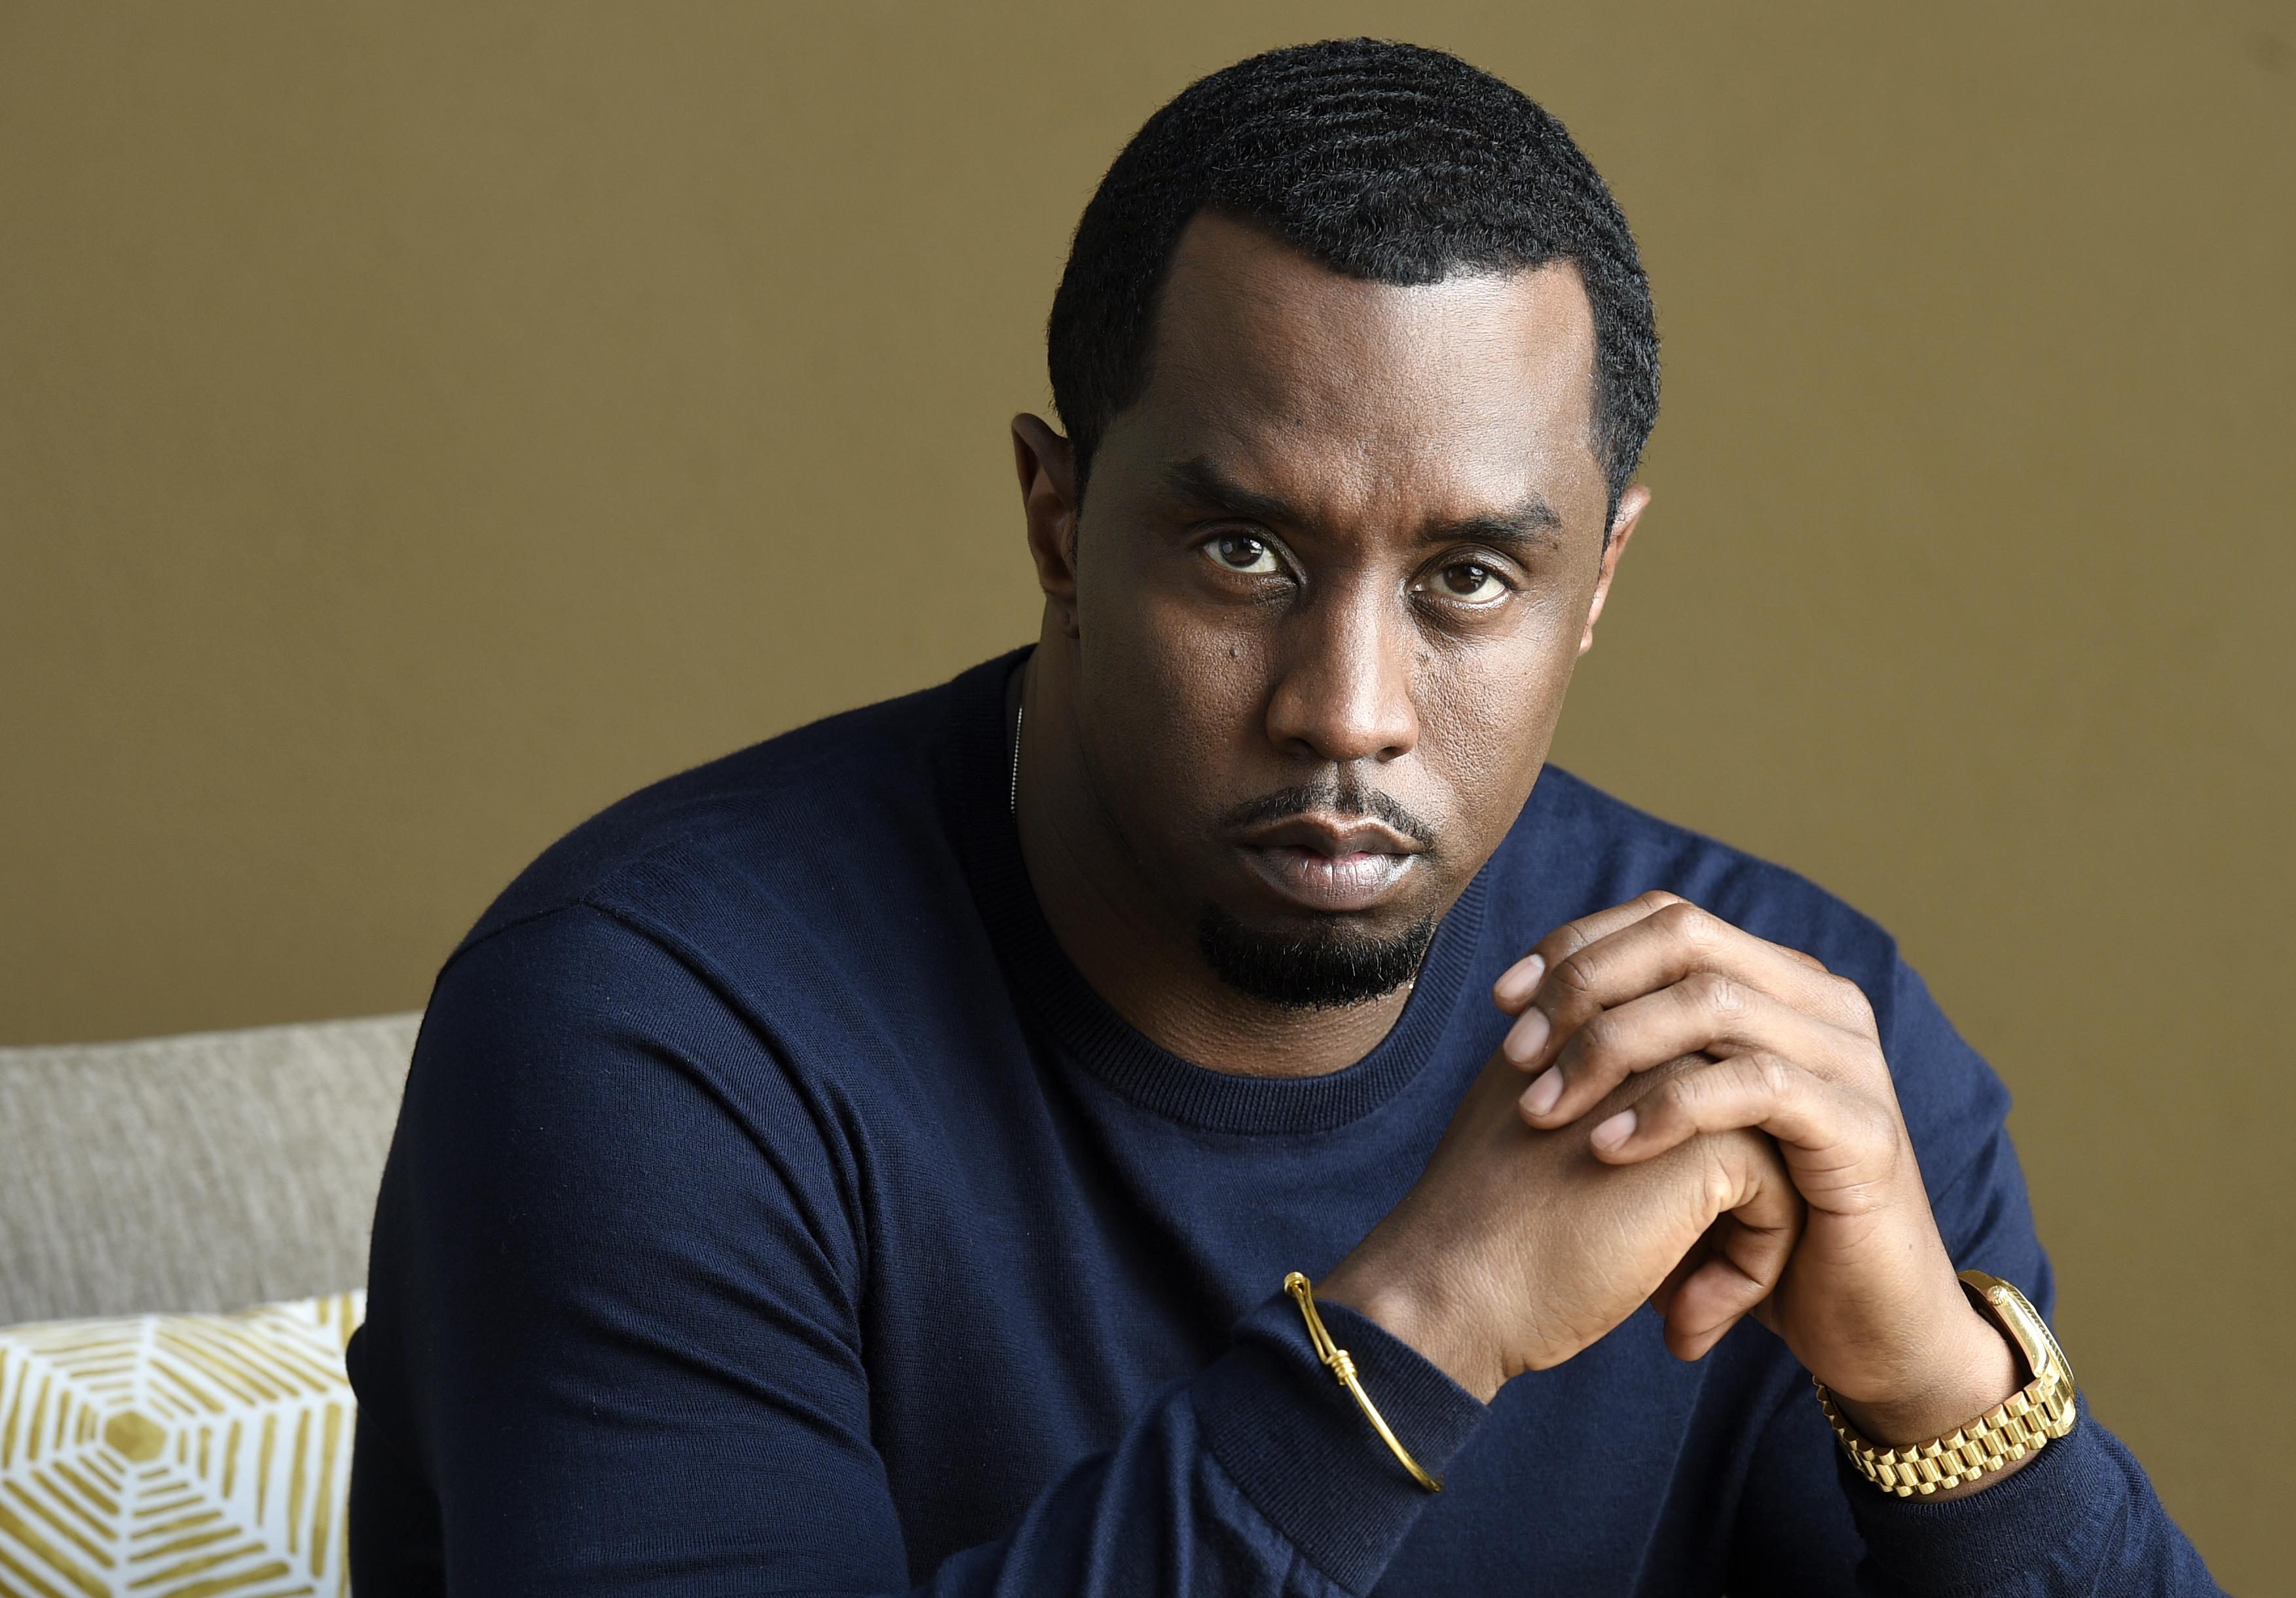 Brother Love Sean ‘Diddy’ Combs changes his name, again The